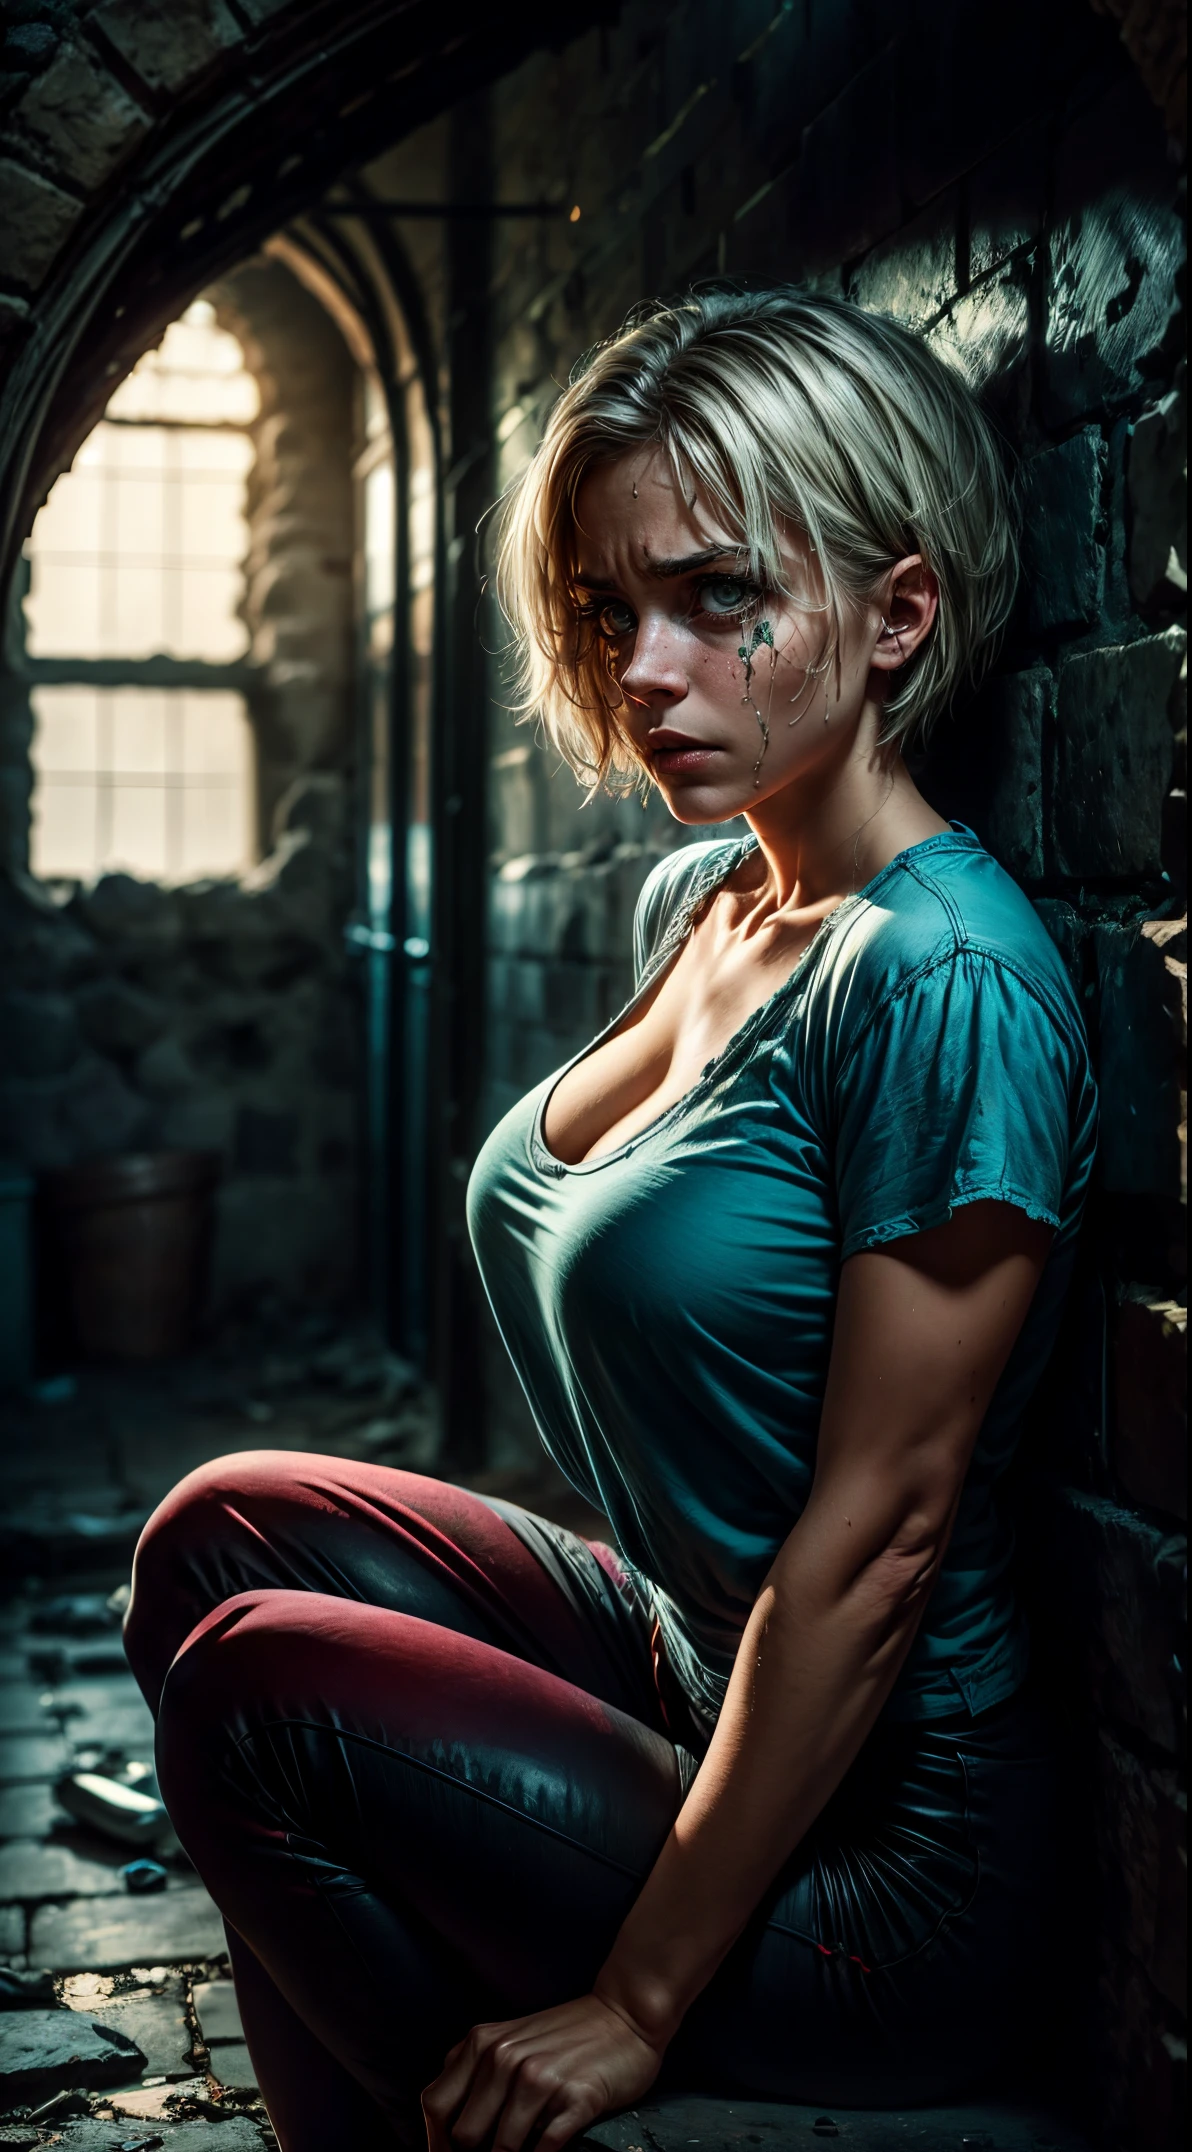 Tia is shown to have a fairly slender figure. She has white-grey hair , she has short hair and large pale green eyes, A girl in her twenties surrounded by old medieval prison walls.  The prison has thick walls made of stone, and there are narrow windows that allow light to penetrate with difficulty, making the atmosphere inside the prison dark and restricted.
 The girl wears simple and vulgar clothes, reflecting the life of poverty and oppression she lives inside the prison.  Her eyes seem to reflect pain and sadness, indicating a difficult and turbulent experience.
 The girl sits on one of the cold walls, showing her fatigue and exhaustion.  She may be carrying a psychological scar from being confined inside this harsh place for such a long time.
 The picture shows prison bars separating the girl from the outside world, weakening her hope and increasing her feeling of isolation.  Restrictions rob her of her freedom and prevent her from moving around and interacting with the outside world.
 The girl's facial expressions reflect her attempts to persevere and endure in harsh circumstances.  There may be remaining hope and desire for  and a way out of this turbulent and oppressive environment in her eyes., cleavage exposed, big breasts, superior quality, many details, Puri focus  Sharp and realistic